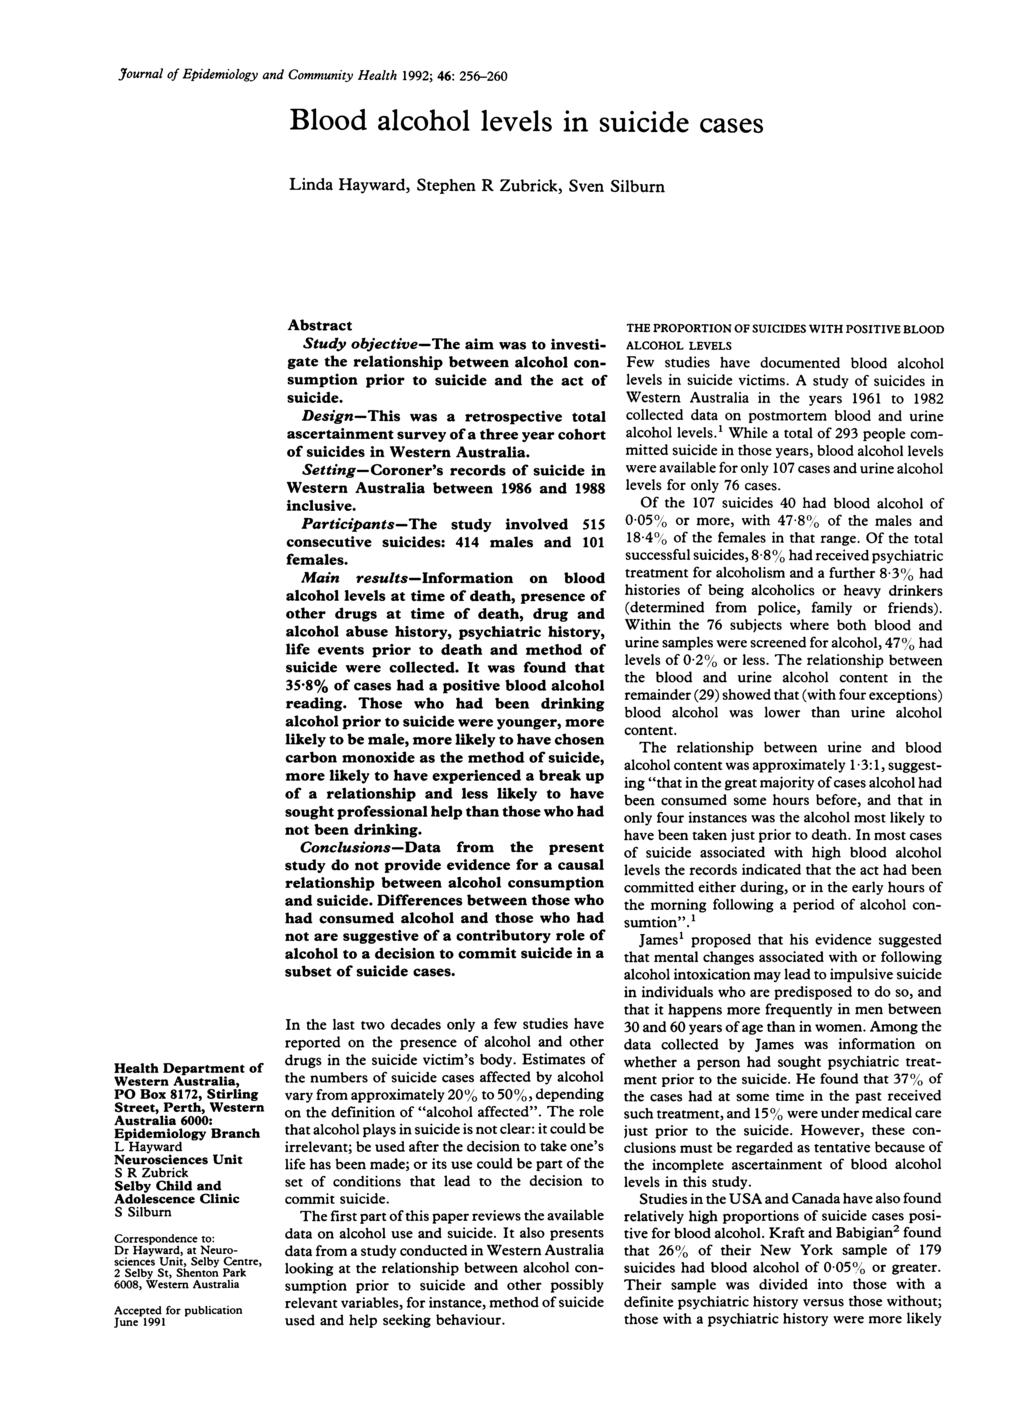 Journal of Epidemiology and Community Health 1992; 46: 256-260 Health Department of Western Australia, PO Box 8172, Stirling Street, Perth, Western Australia 6000: Epidemiology Branch L Hayward